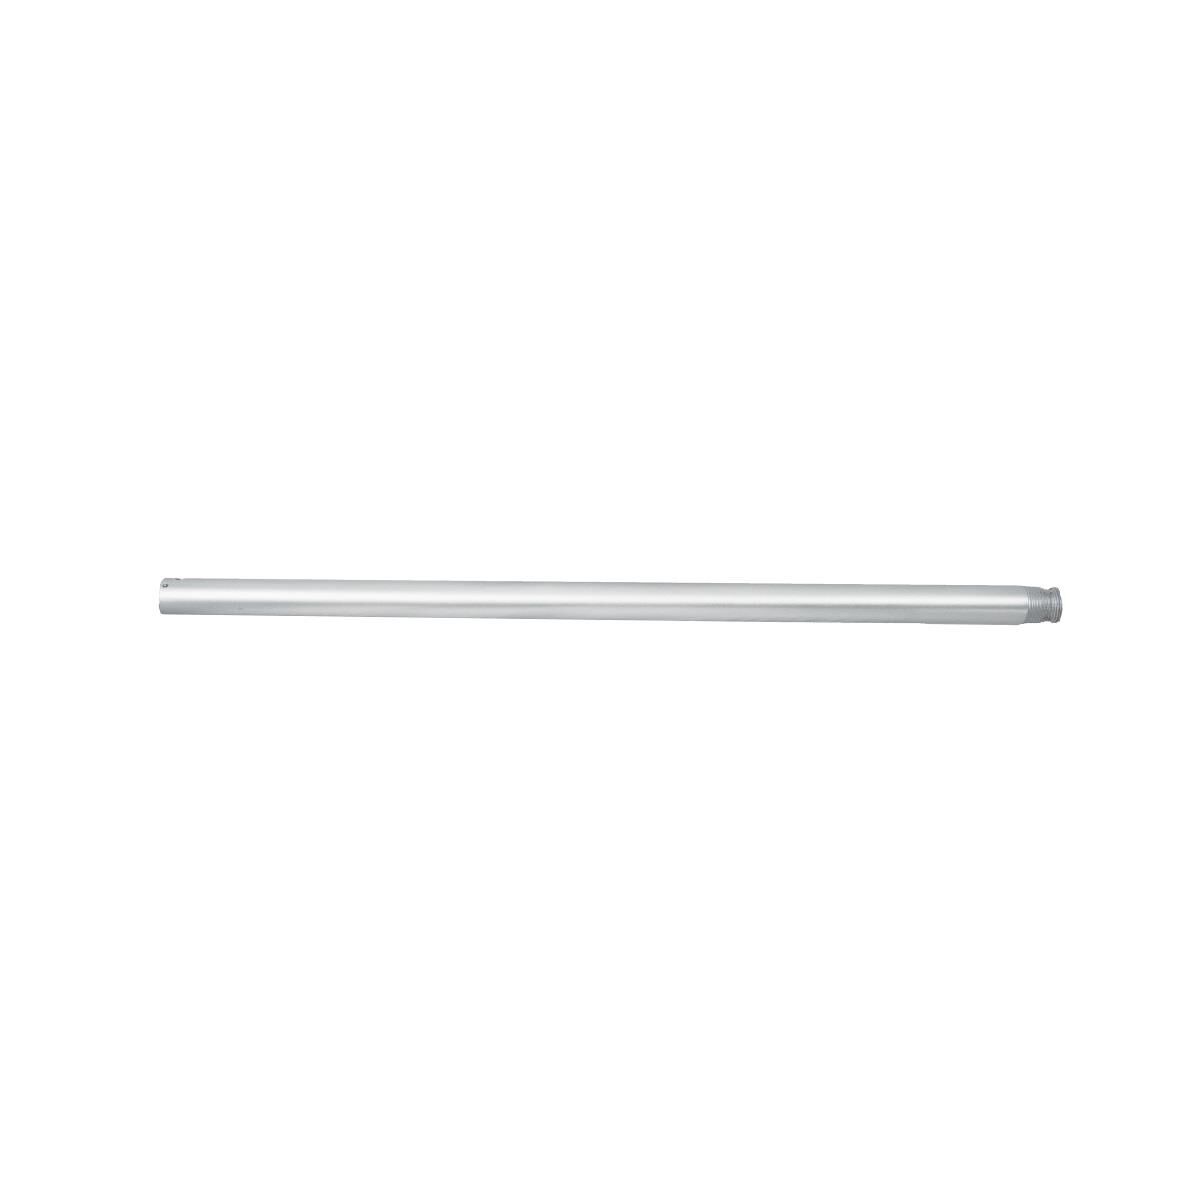 Photos - Fan WAC Lighting 60 Inch  Downrod - DR60-MB - Modern Contemporary DR60-MB